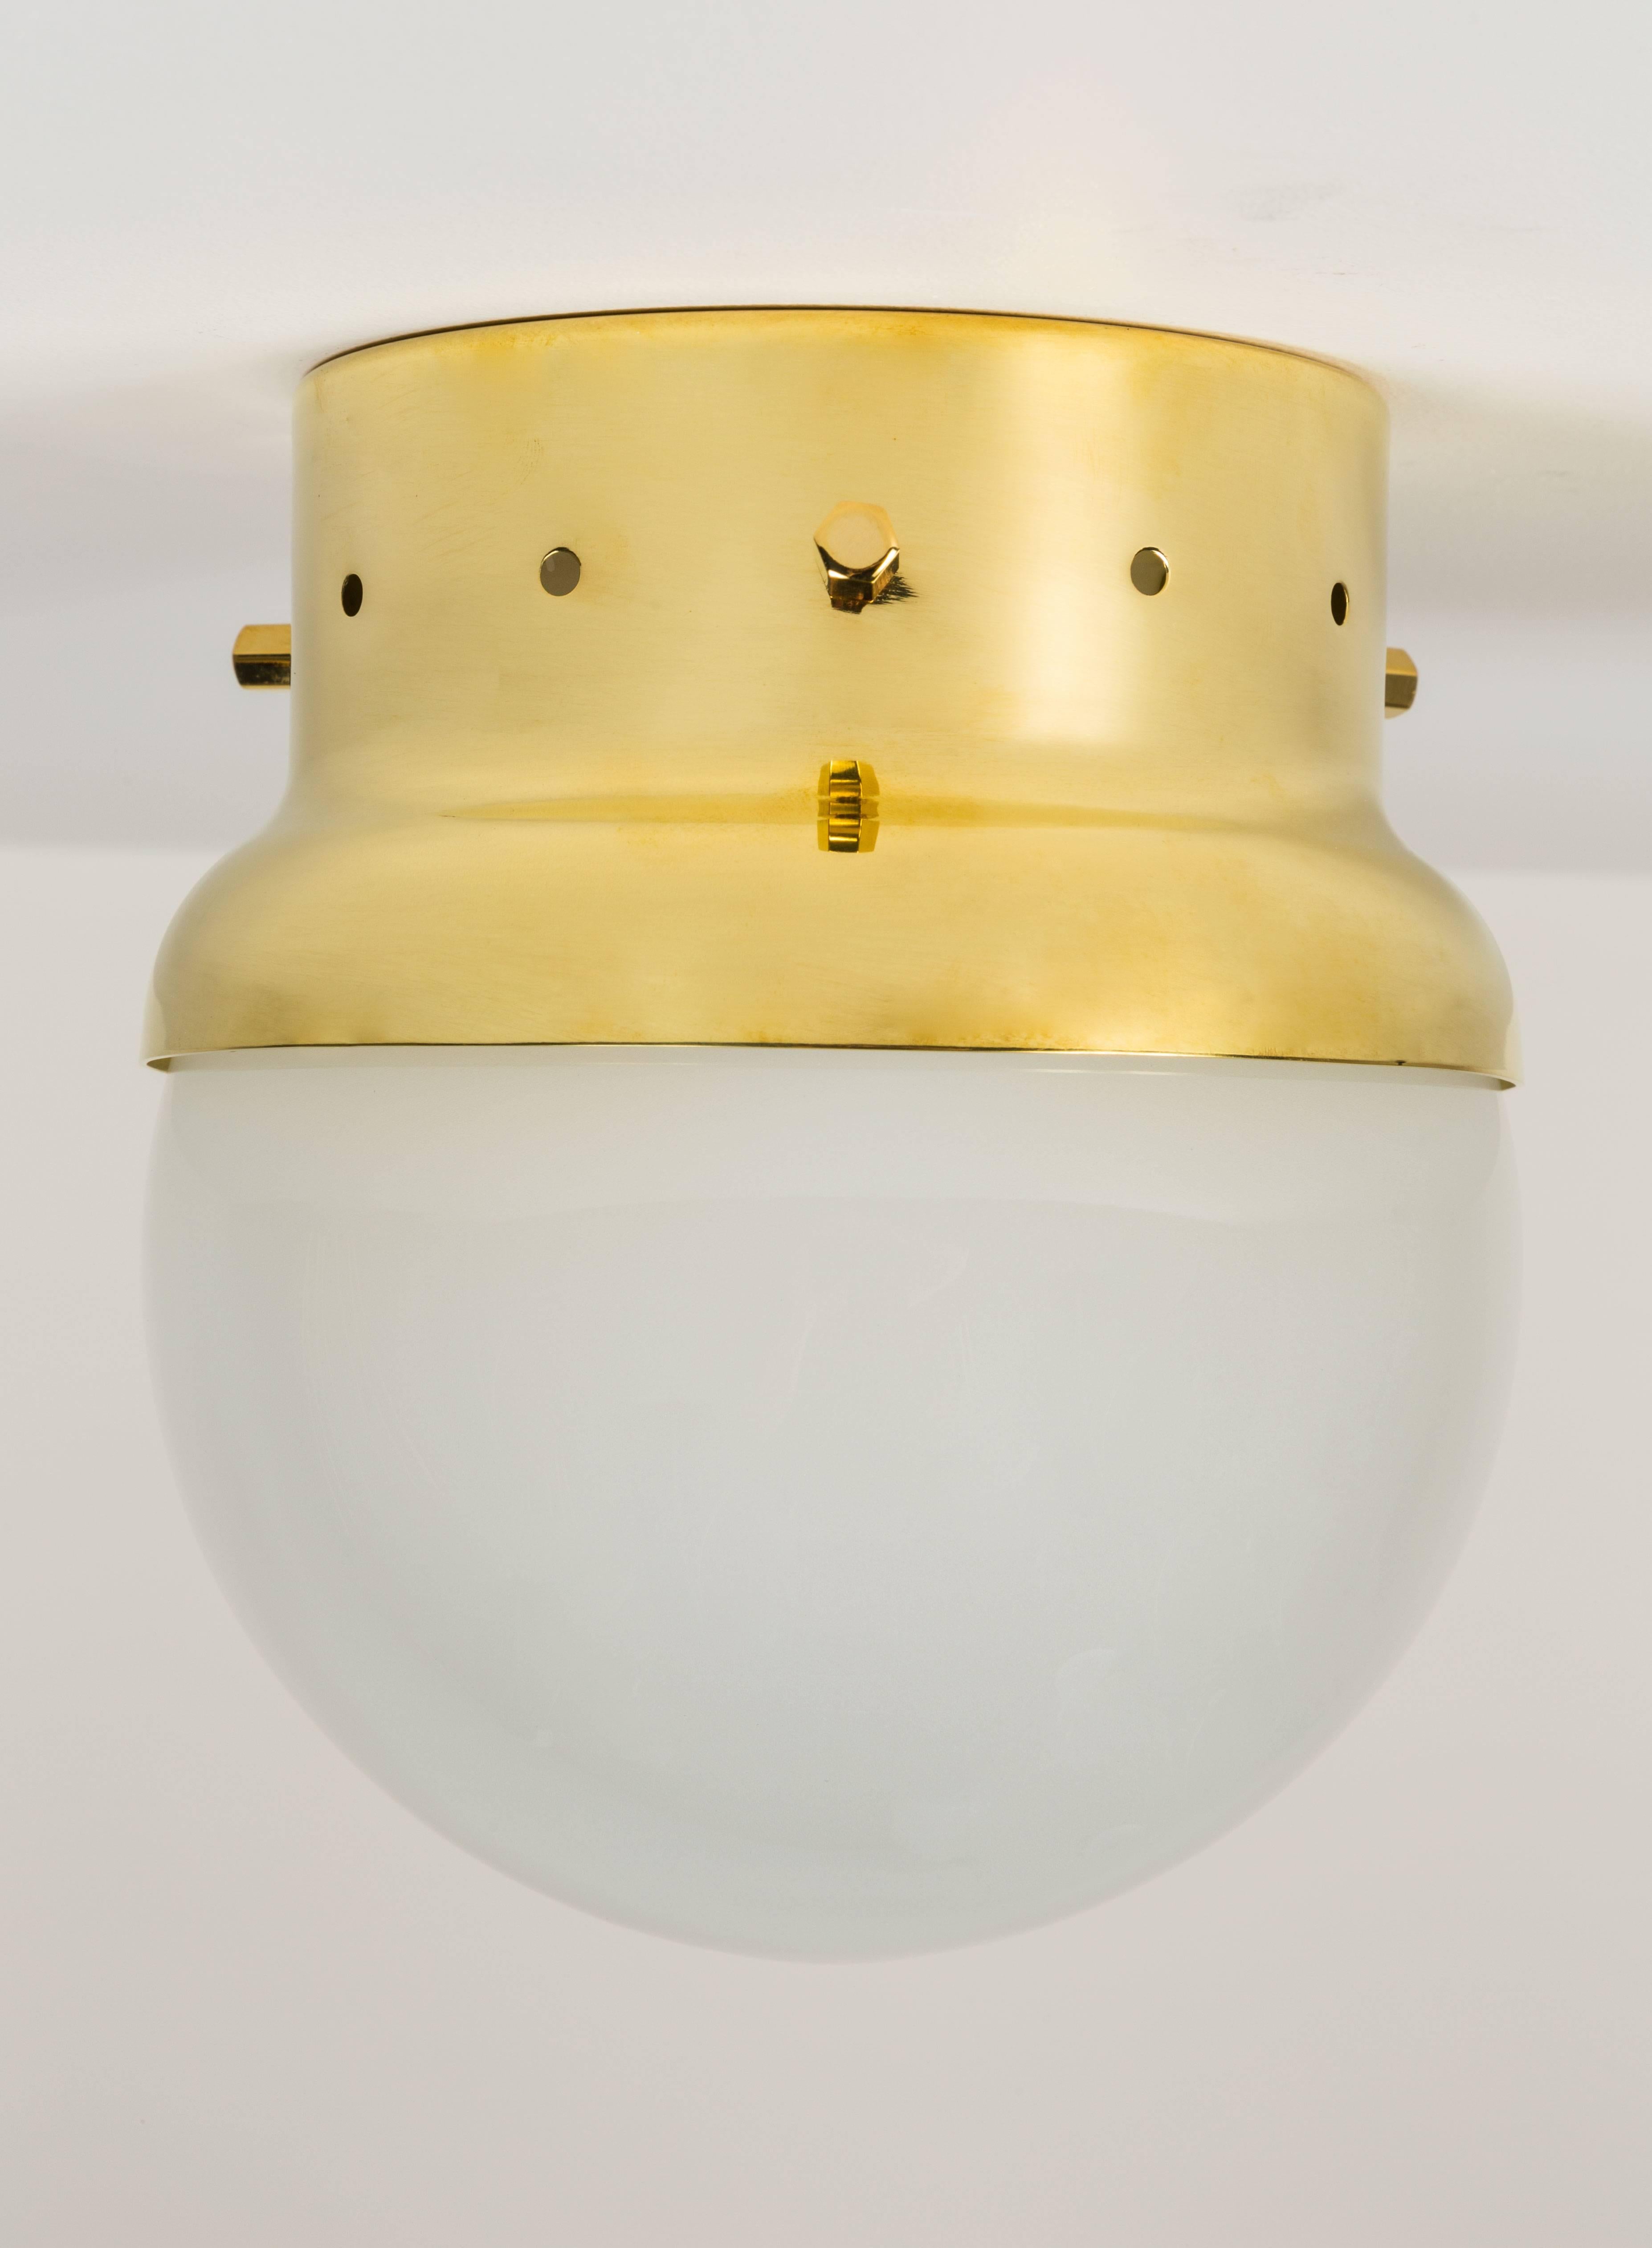 Model LSP16 Affogato Ceiling/ Wall Light designed by Azucena. Polished or natural brass, with frosted glass globe. Originally designed in 1998. 8-10 week lead. Wired for US junctin boxes. Takes one E27 100w maximum bulb